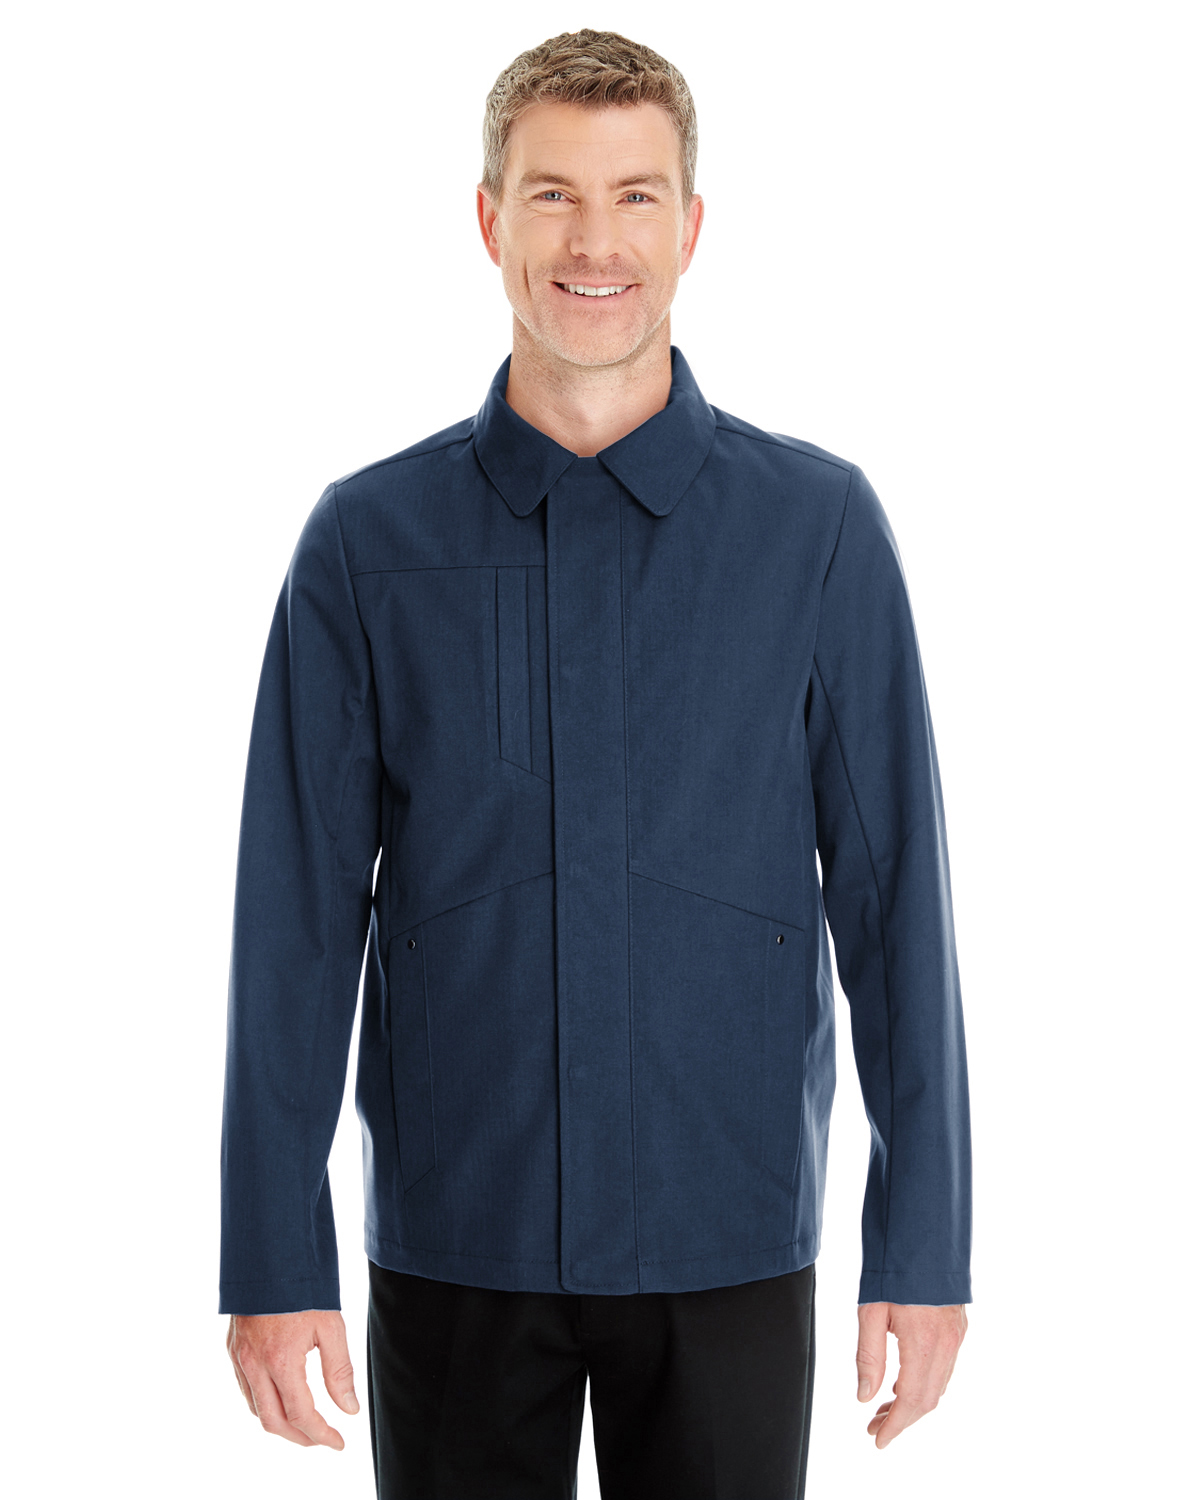 North End NE705 - Men's Edge Soft Shell Jacket with Fold-Down Collar